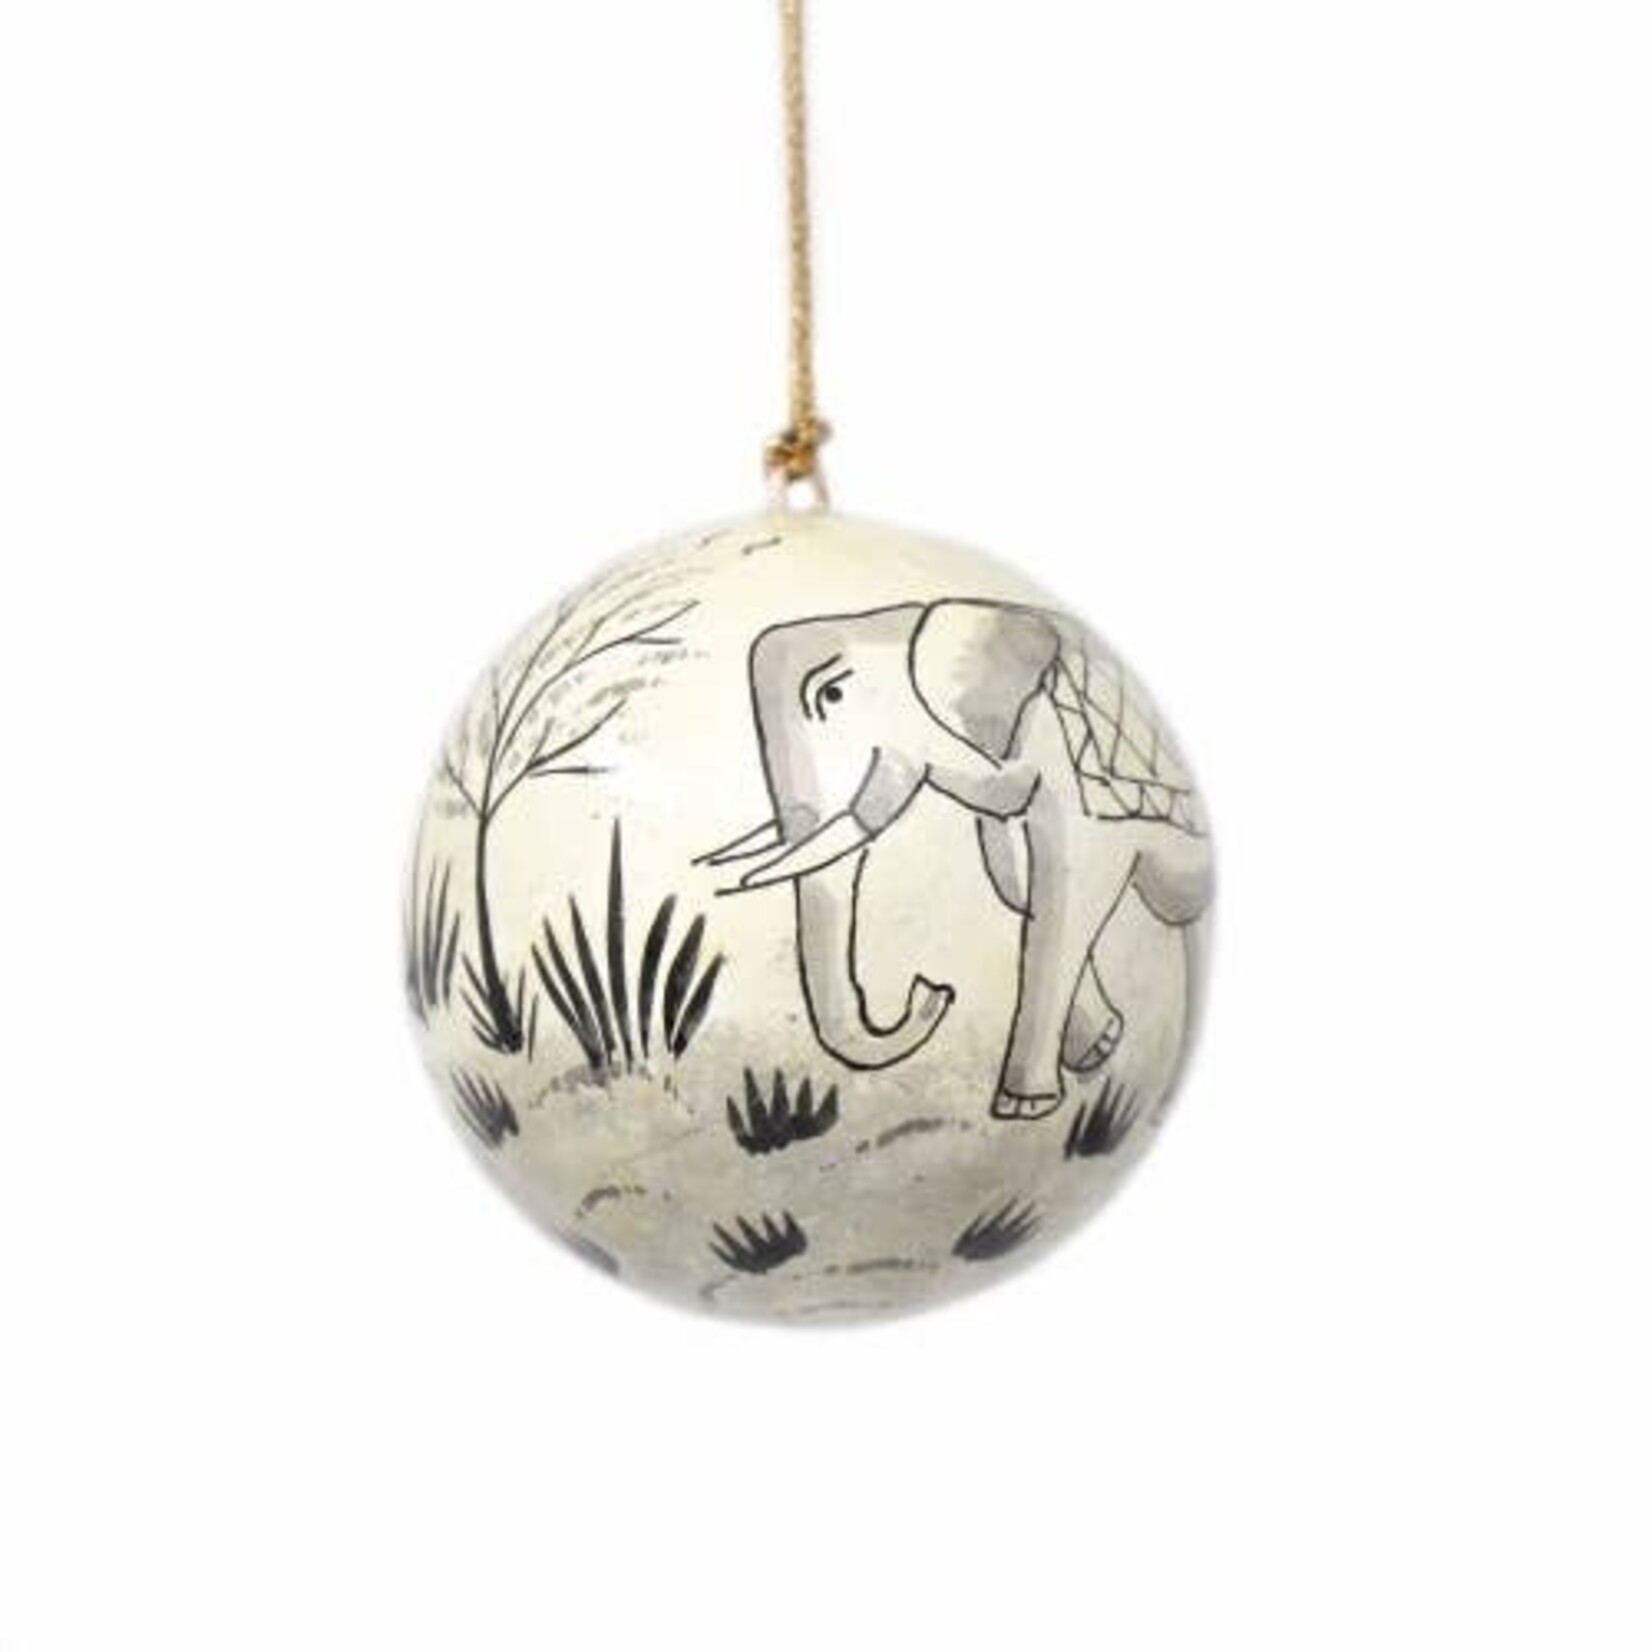 Global Crafts Handpainted Elephant Ball Ornament, India